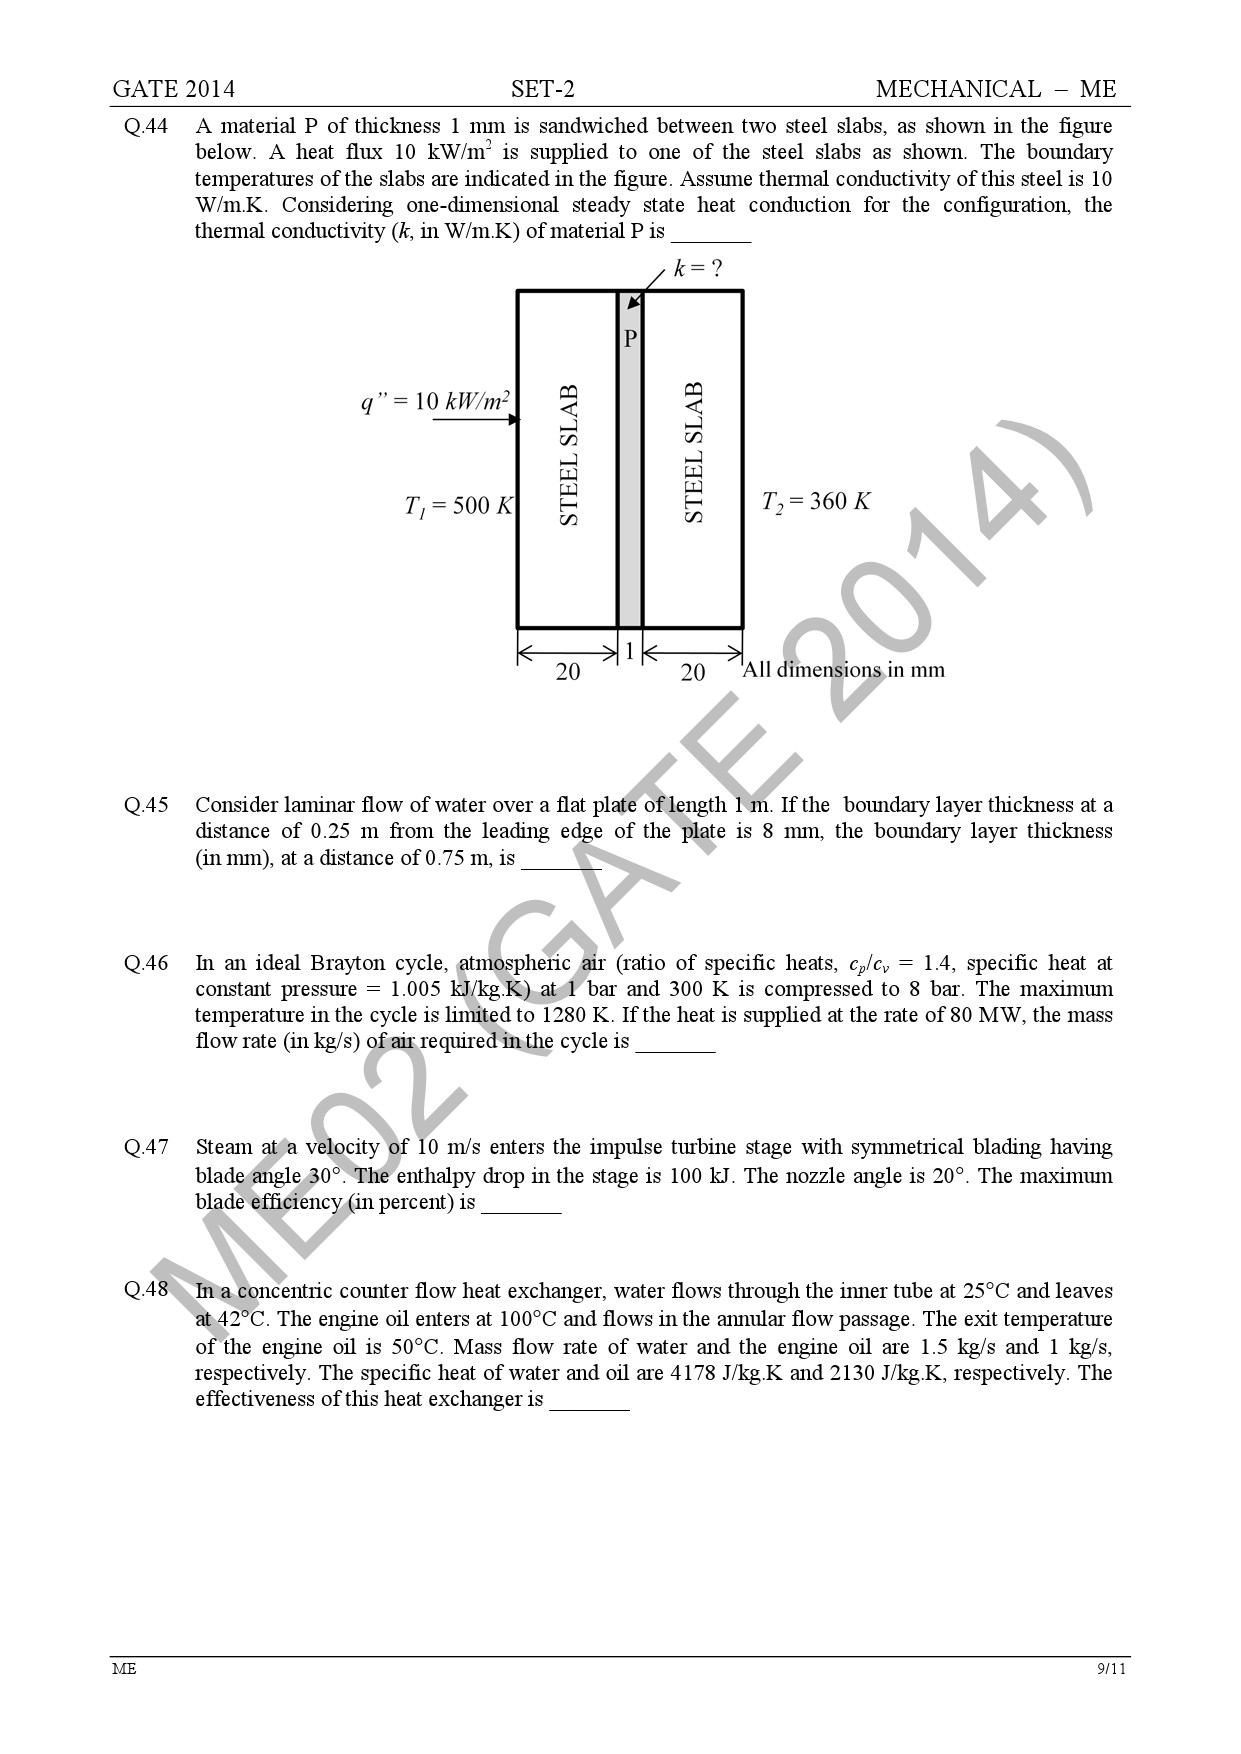 GATE Exam Question Paper 2014 Mechanical Engineering Set 2 15